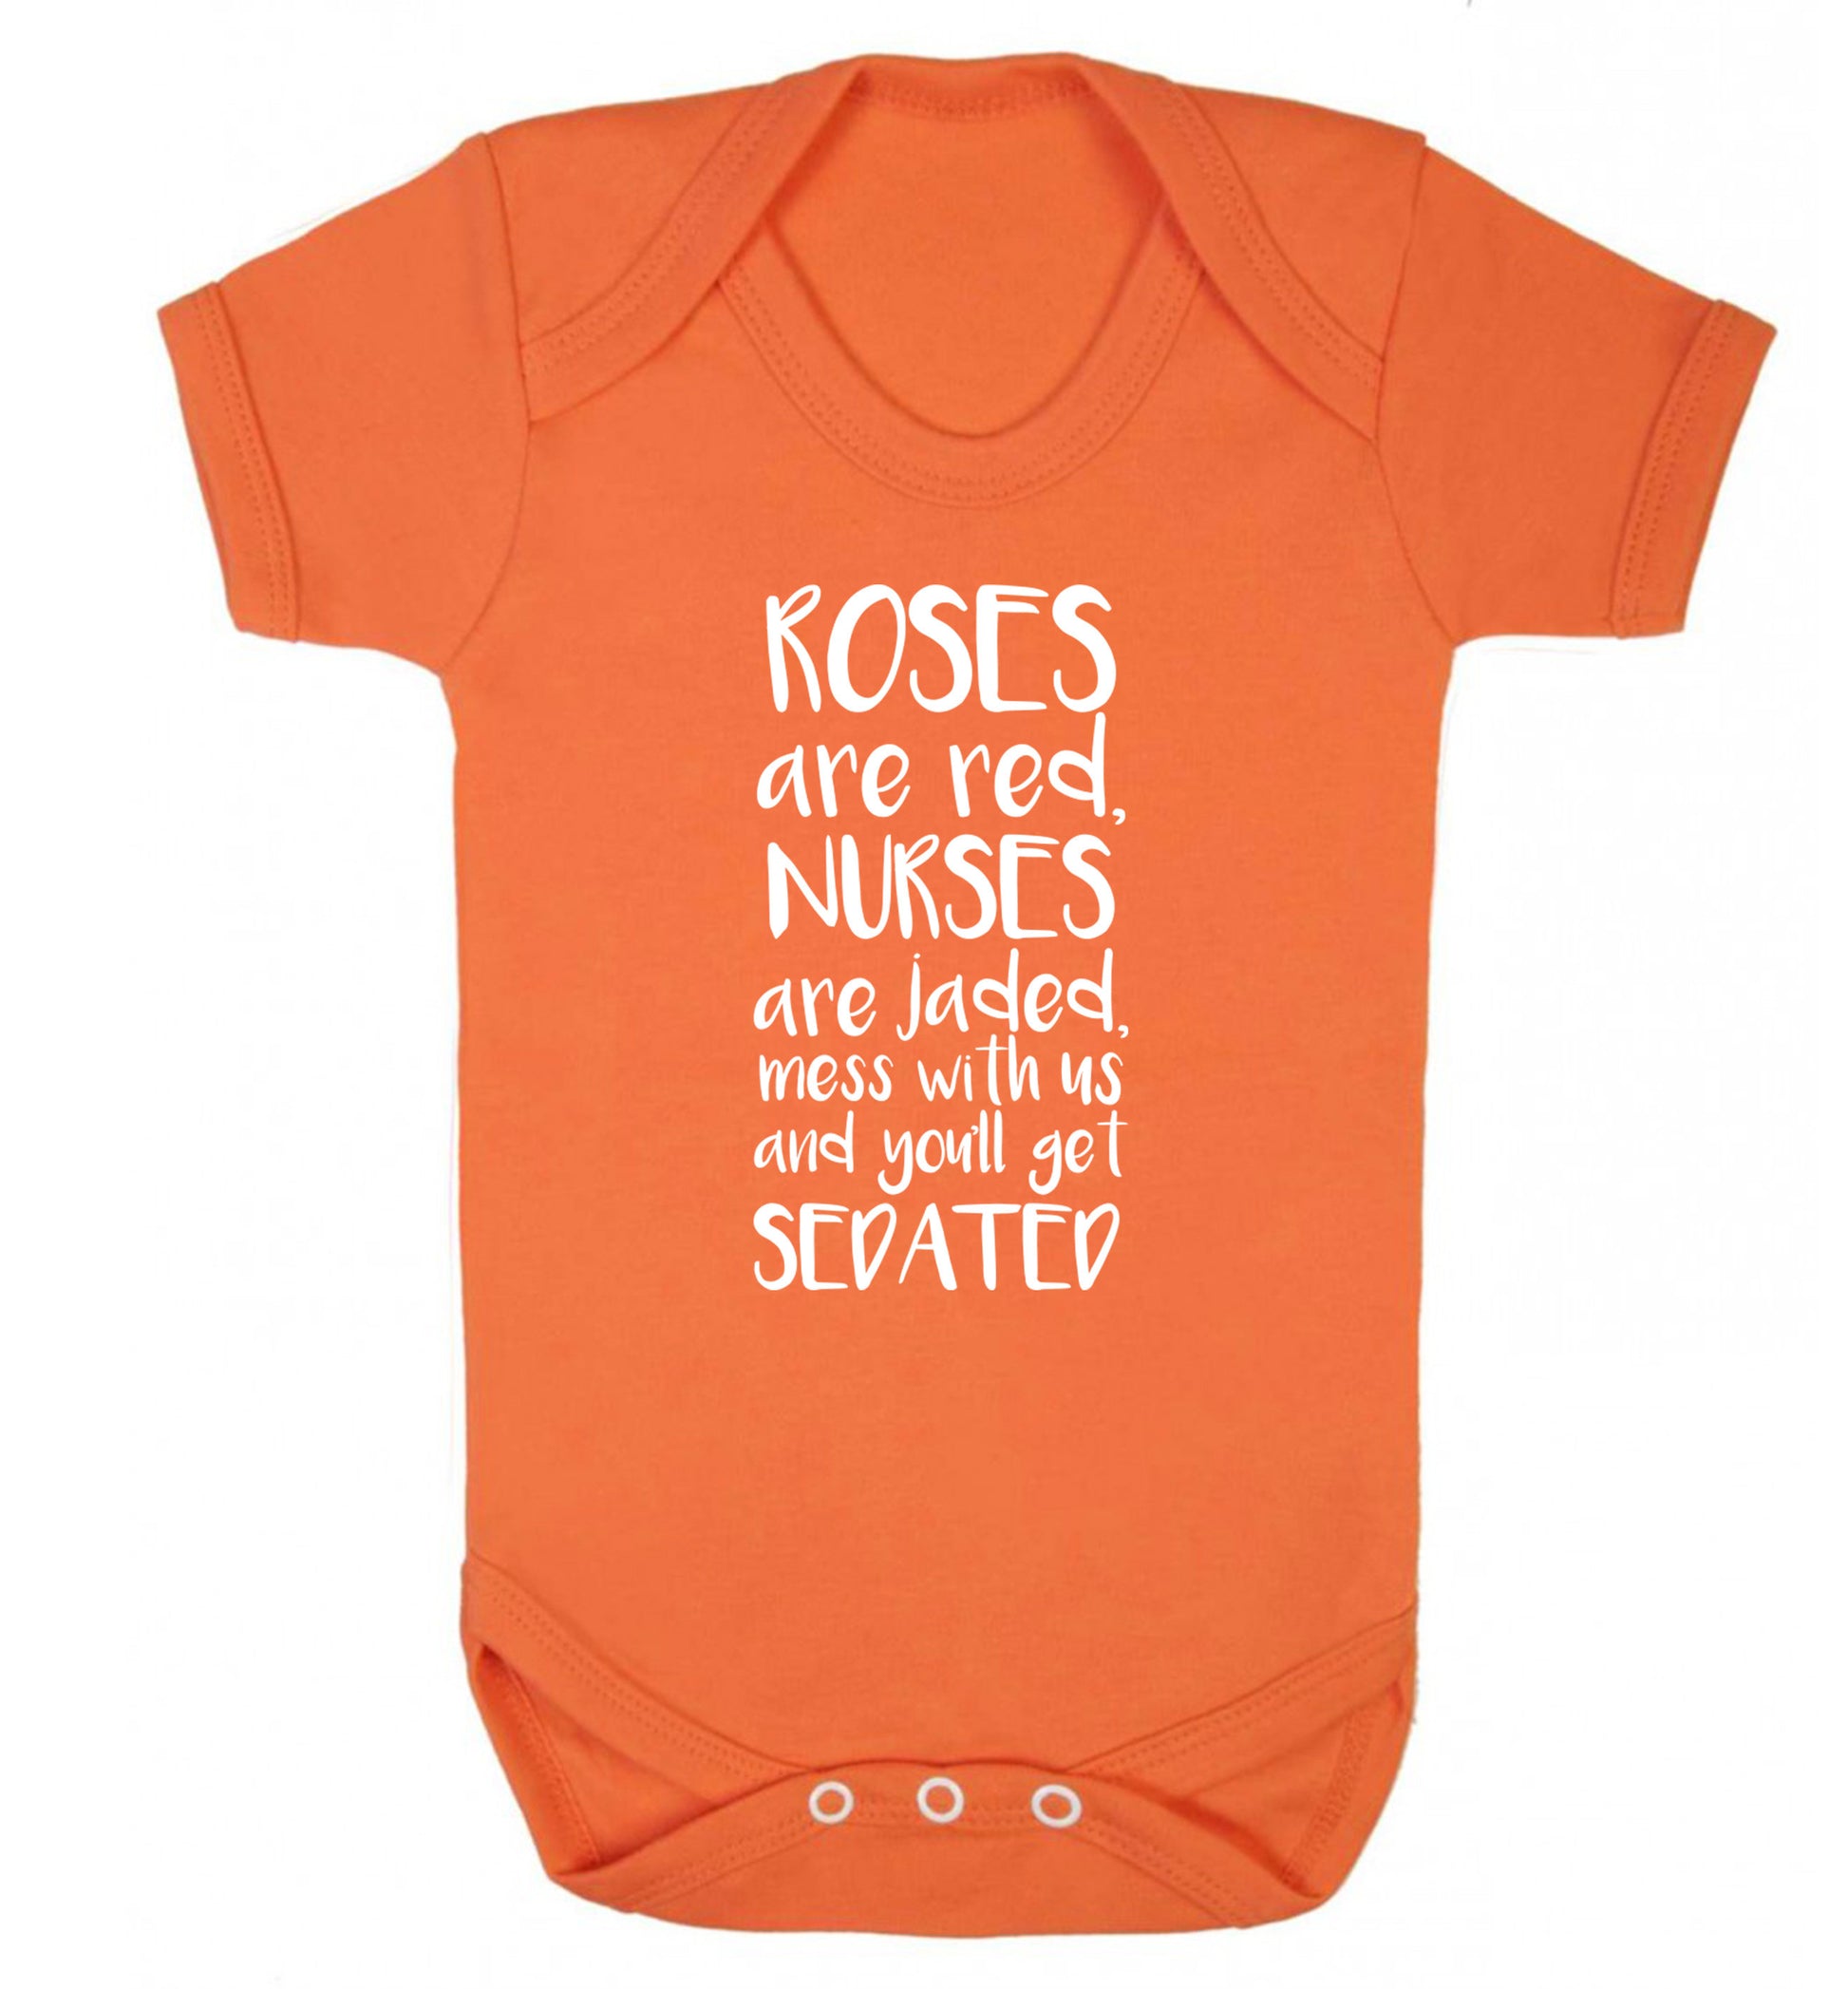 Roses are red, nurses are jaded, mess with us and you'll get sedated Baby Vest orange 18-24 months